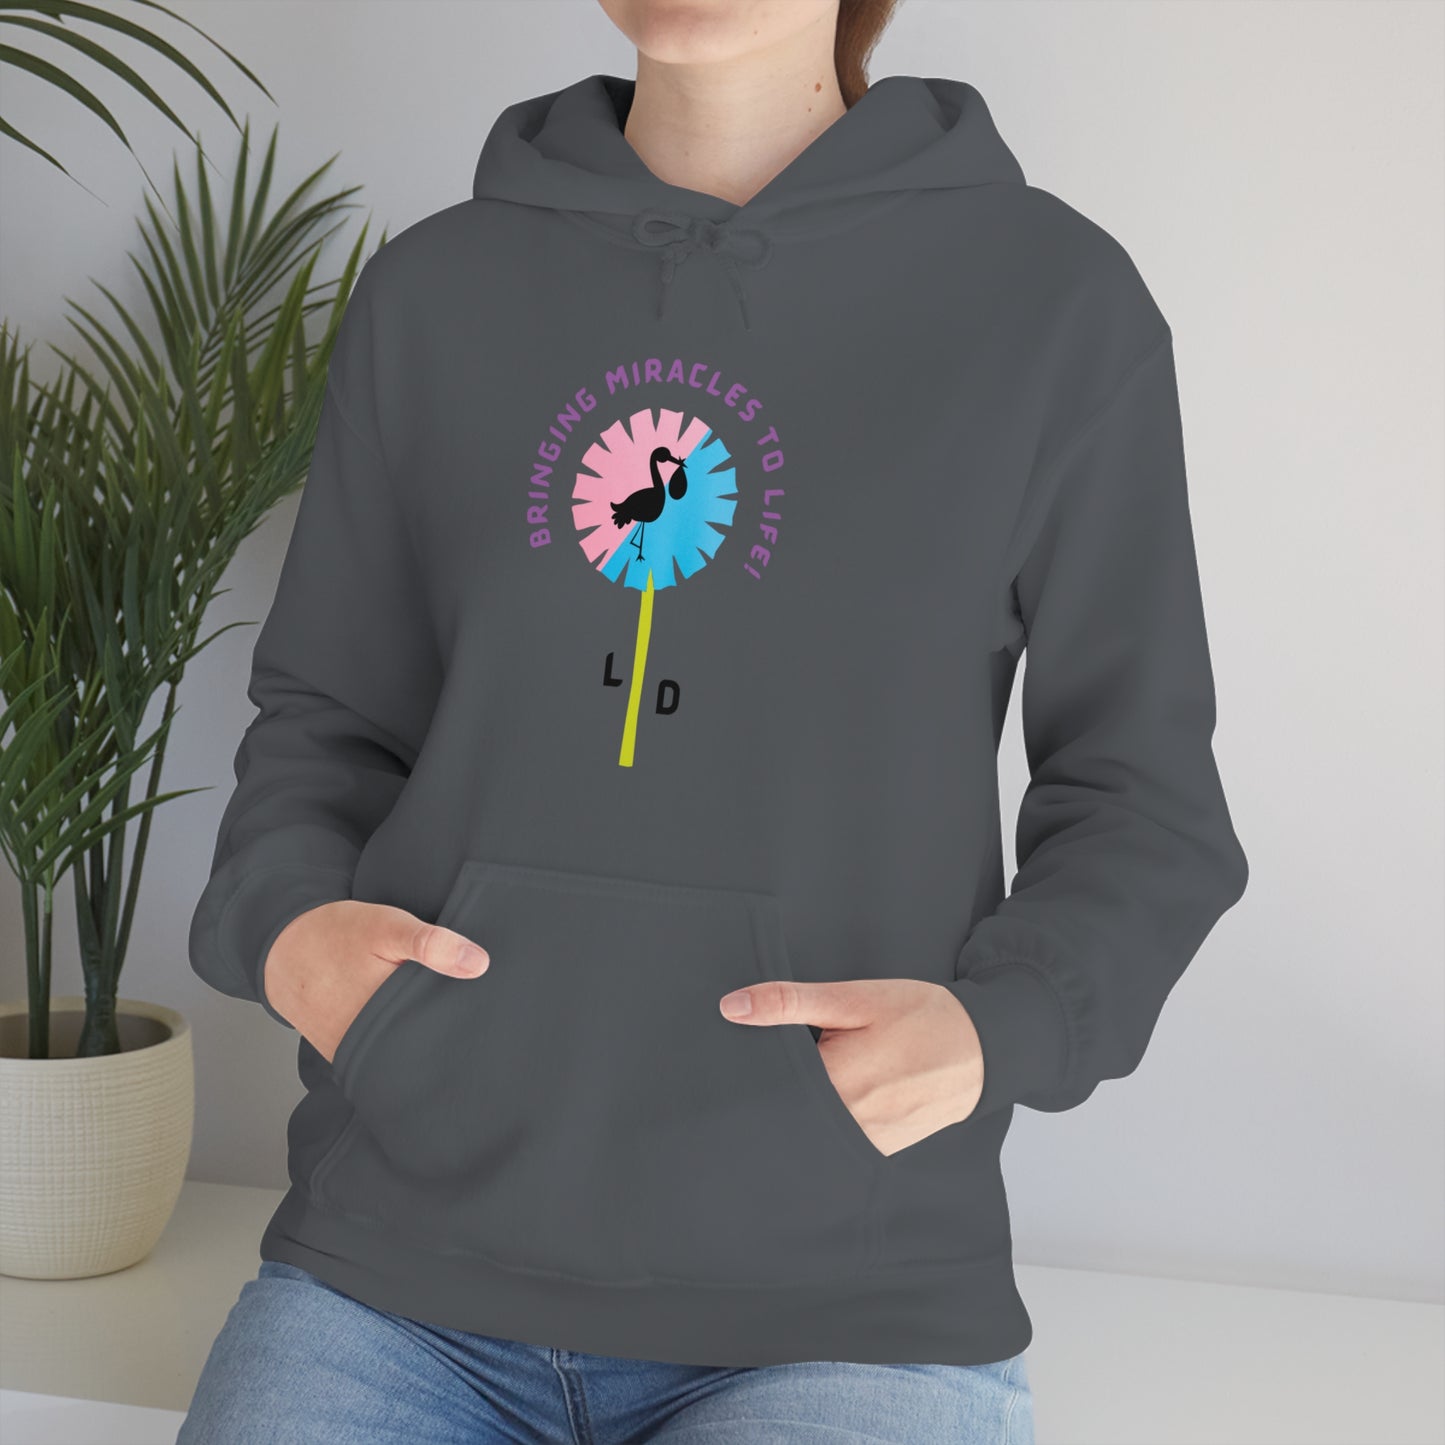 LABOR AND DELIVERY NURSE MIRACLES HOODED SWEATSHIRT GIFT